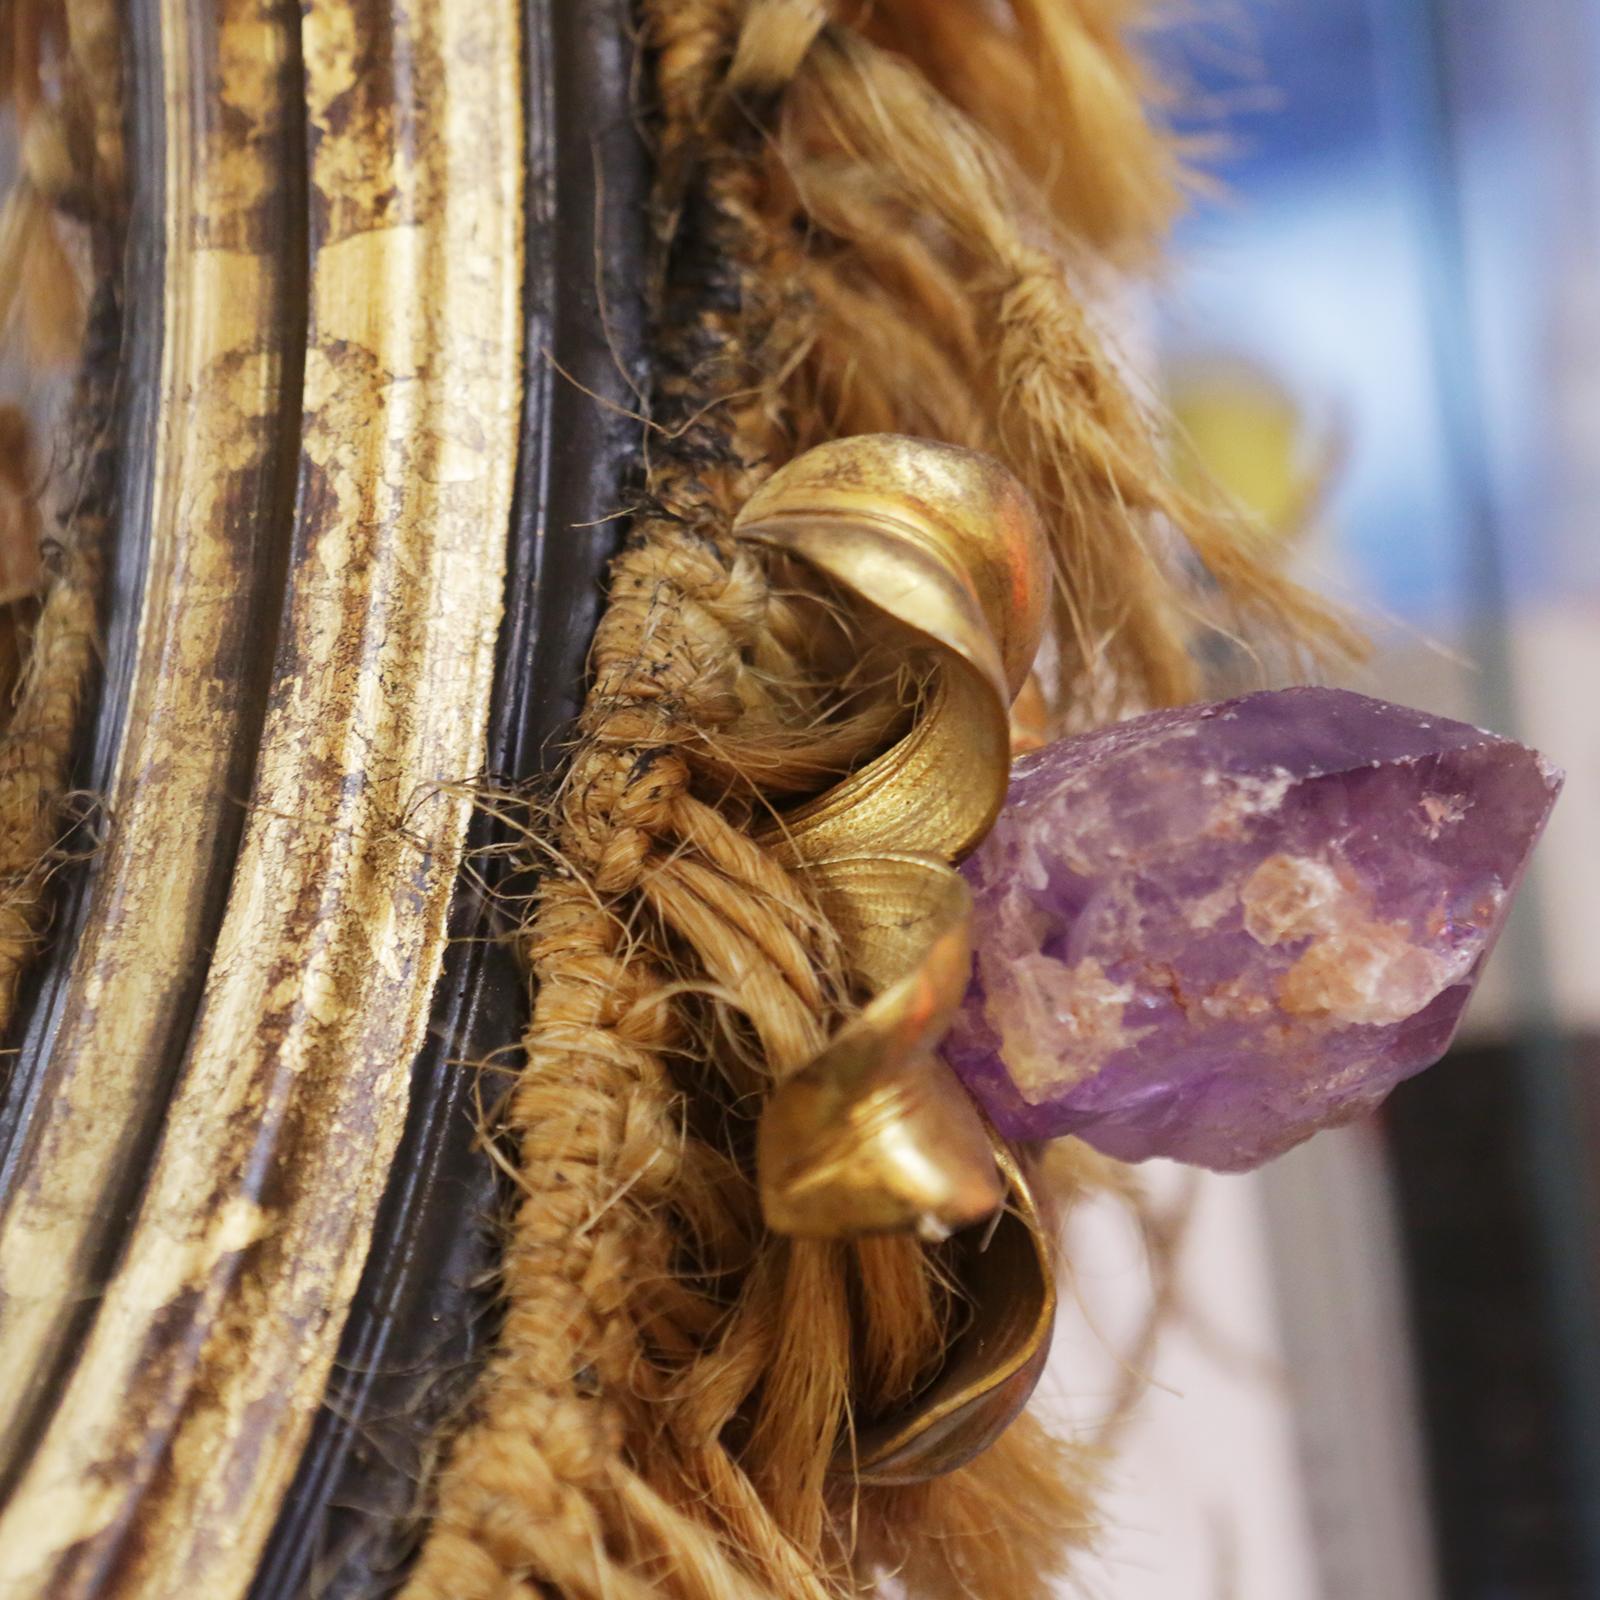 Hand-Crafted Amethyst Mirror with Amethyst Stone from Brazil